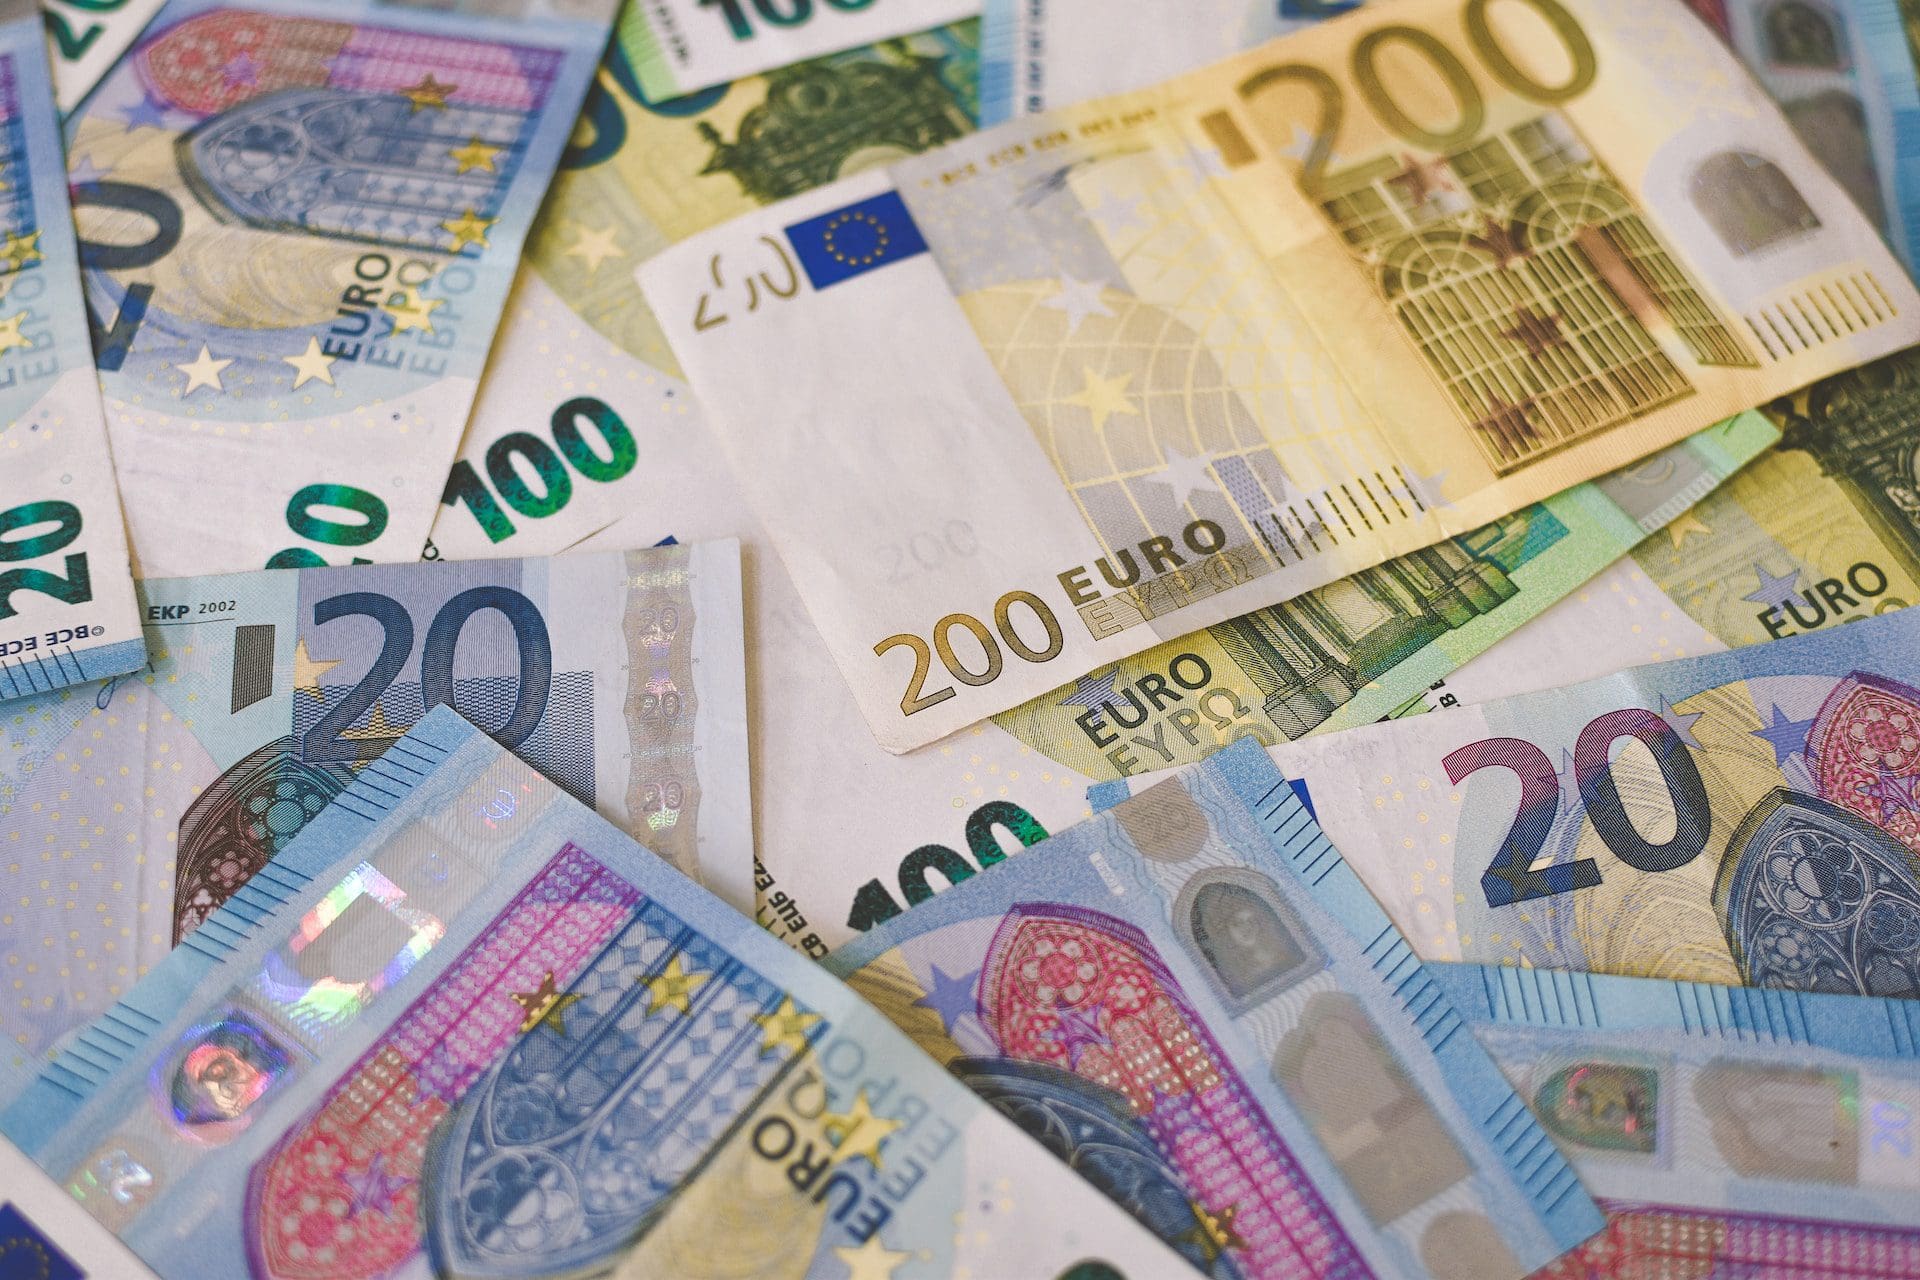 Survey: Majority of Germans in favor of unconditional basic income